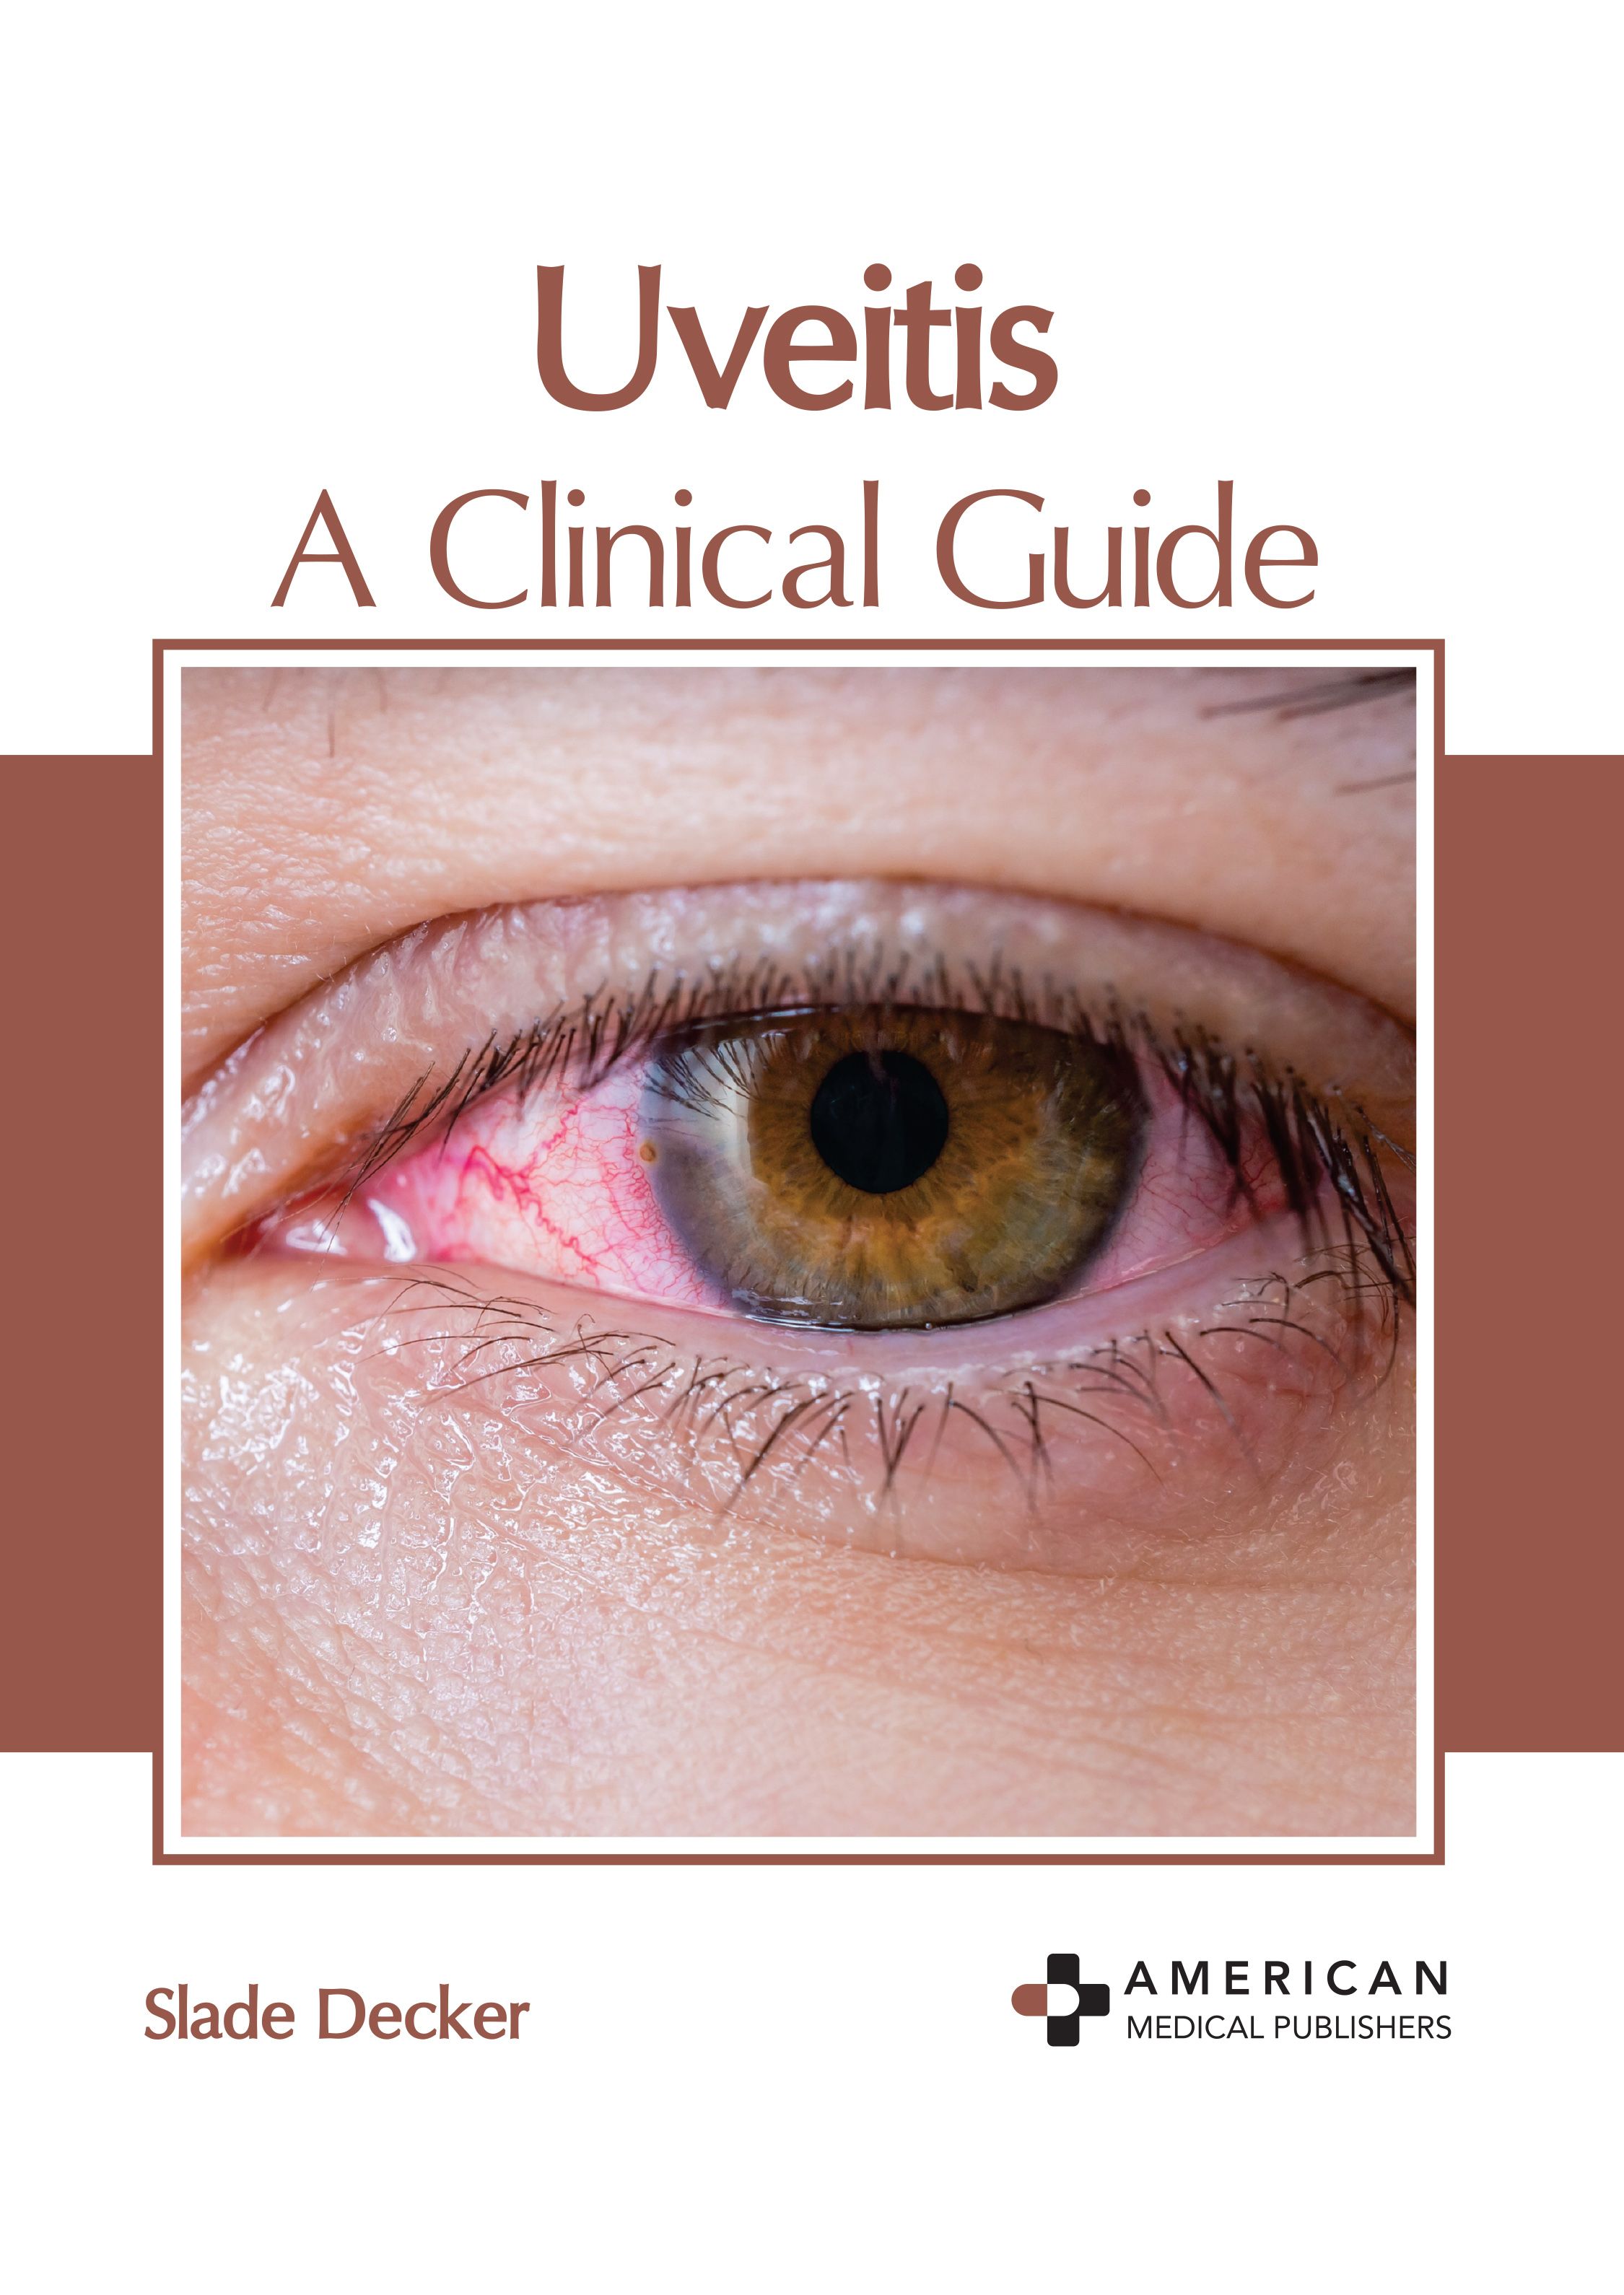 UVEITIS: A CLINICAL GUIDE